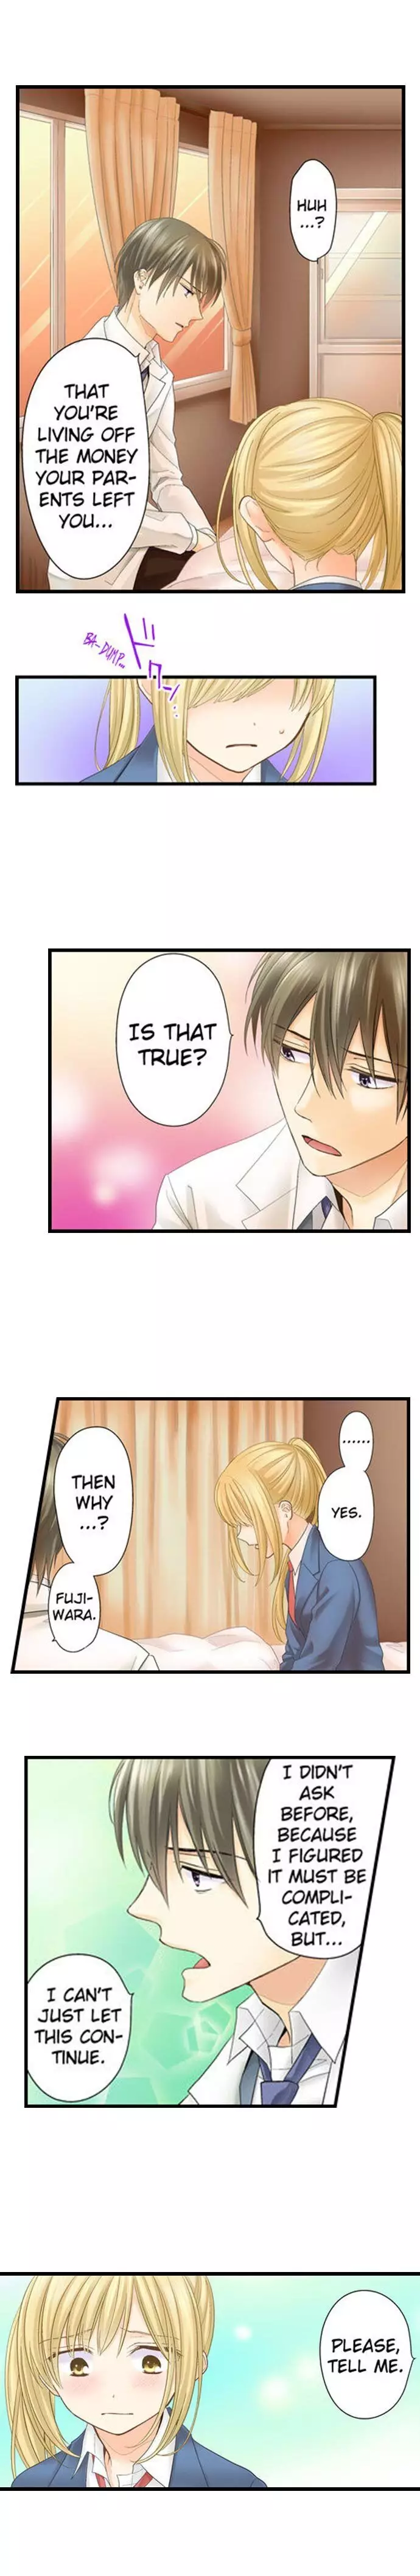 Running A Love Hotel With My Math Teacher - 8 page 3